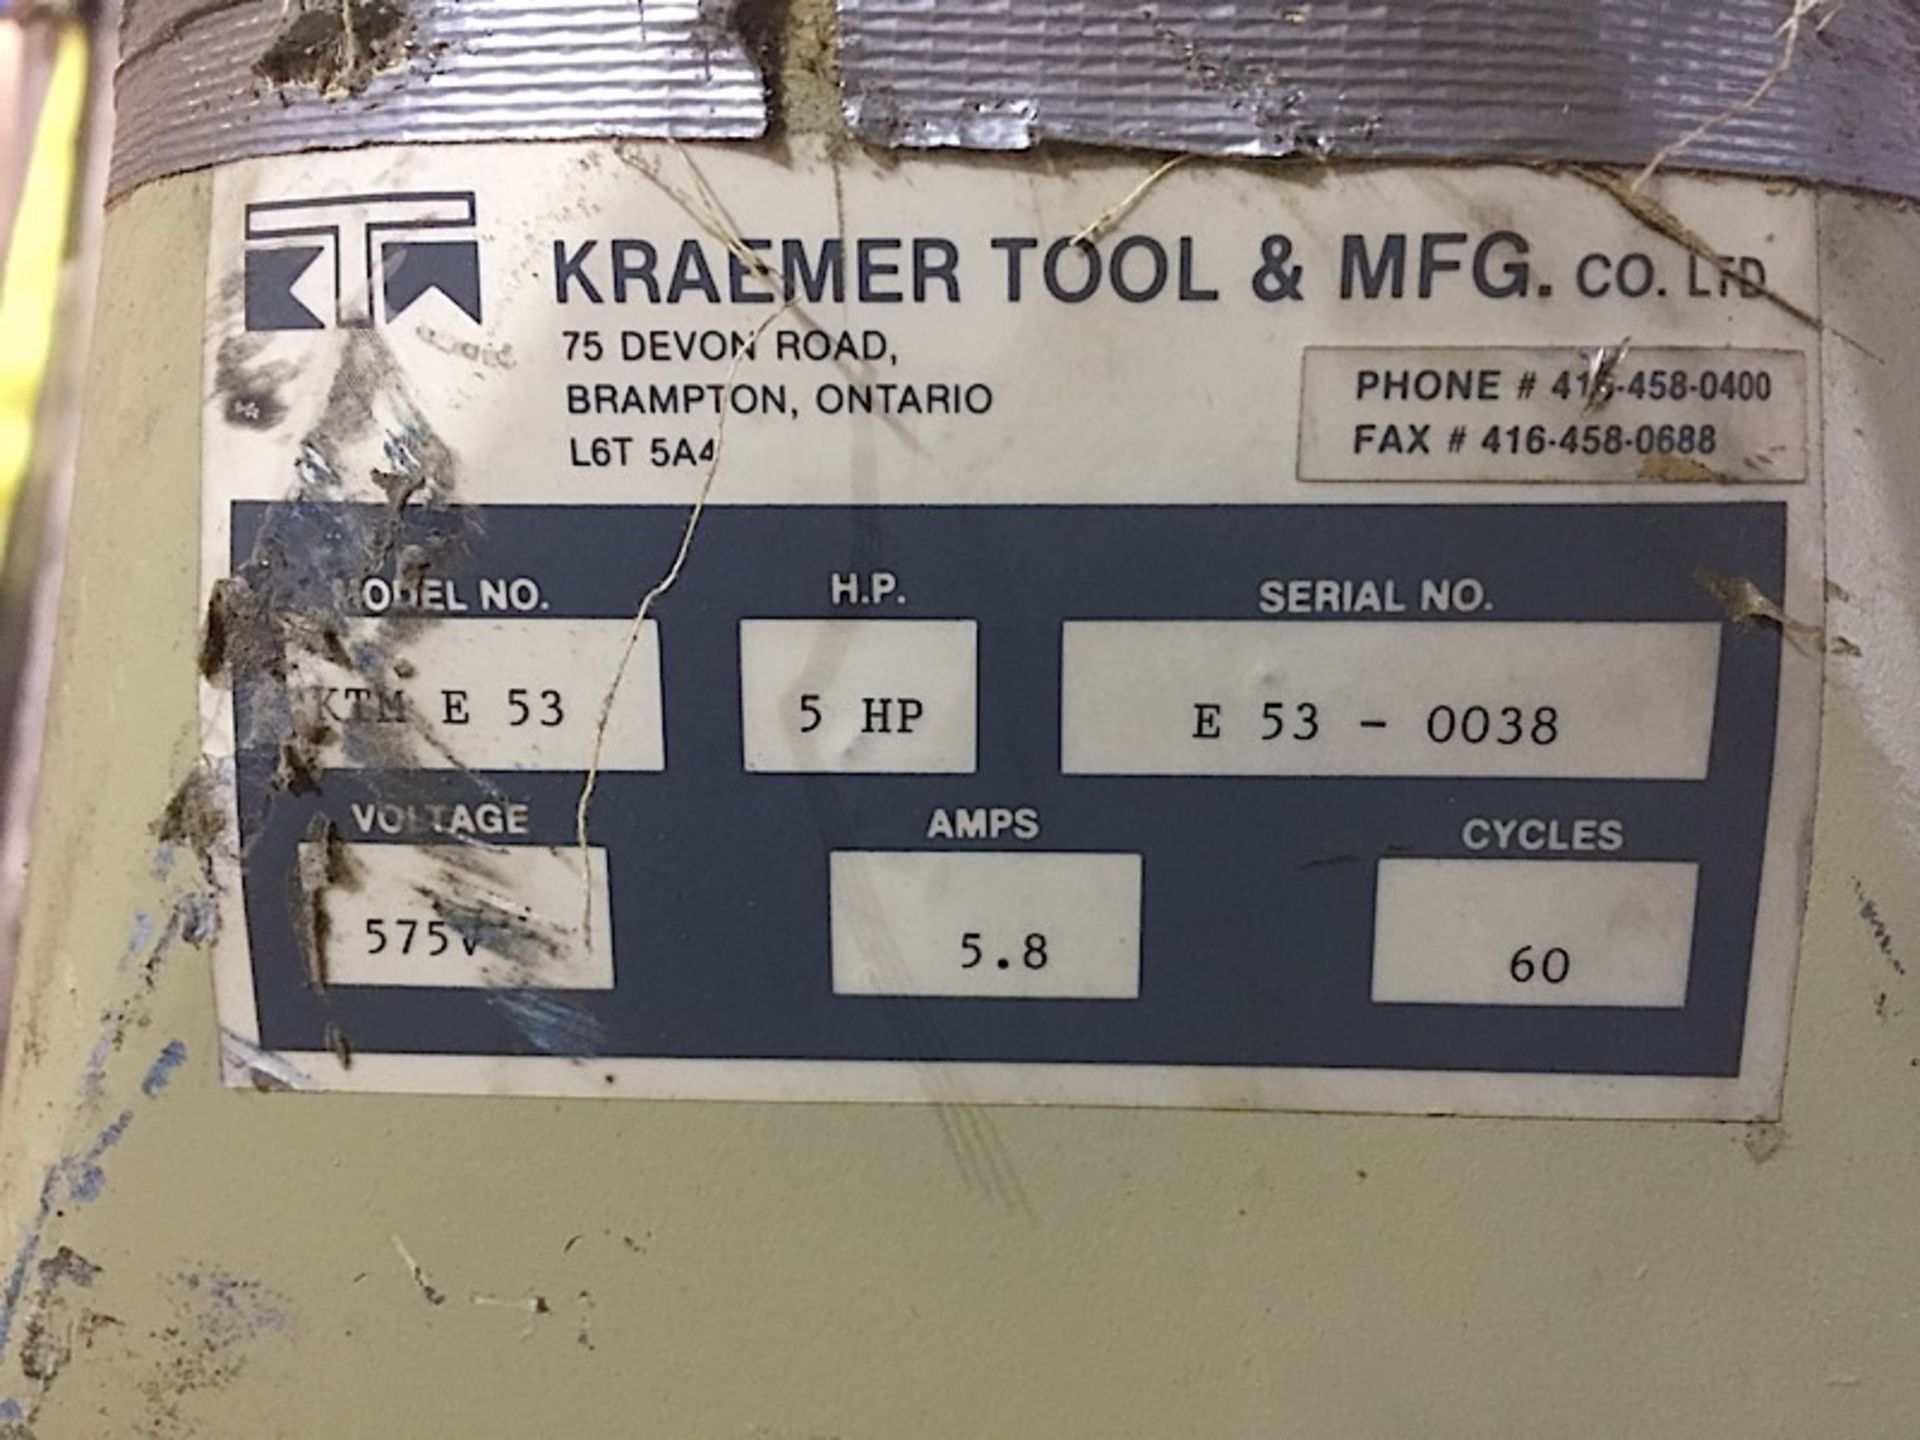 KRAEMER DUST COLLECTION 5HP BLOWER - Image 2 of 2